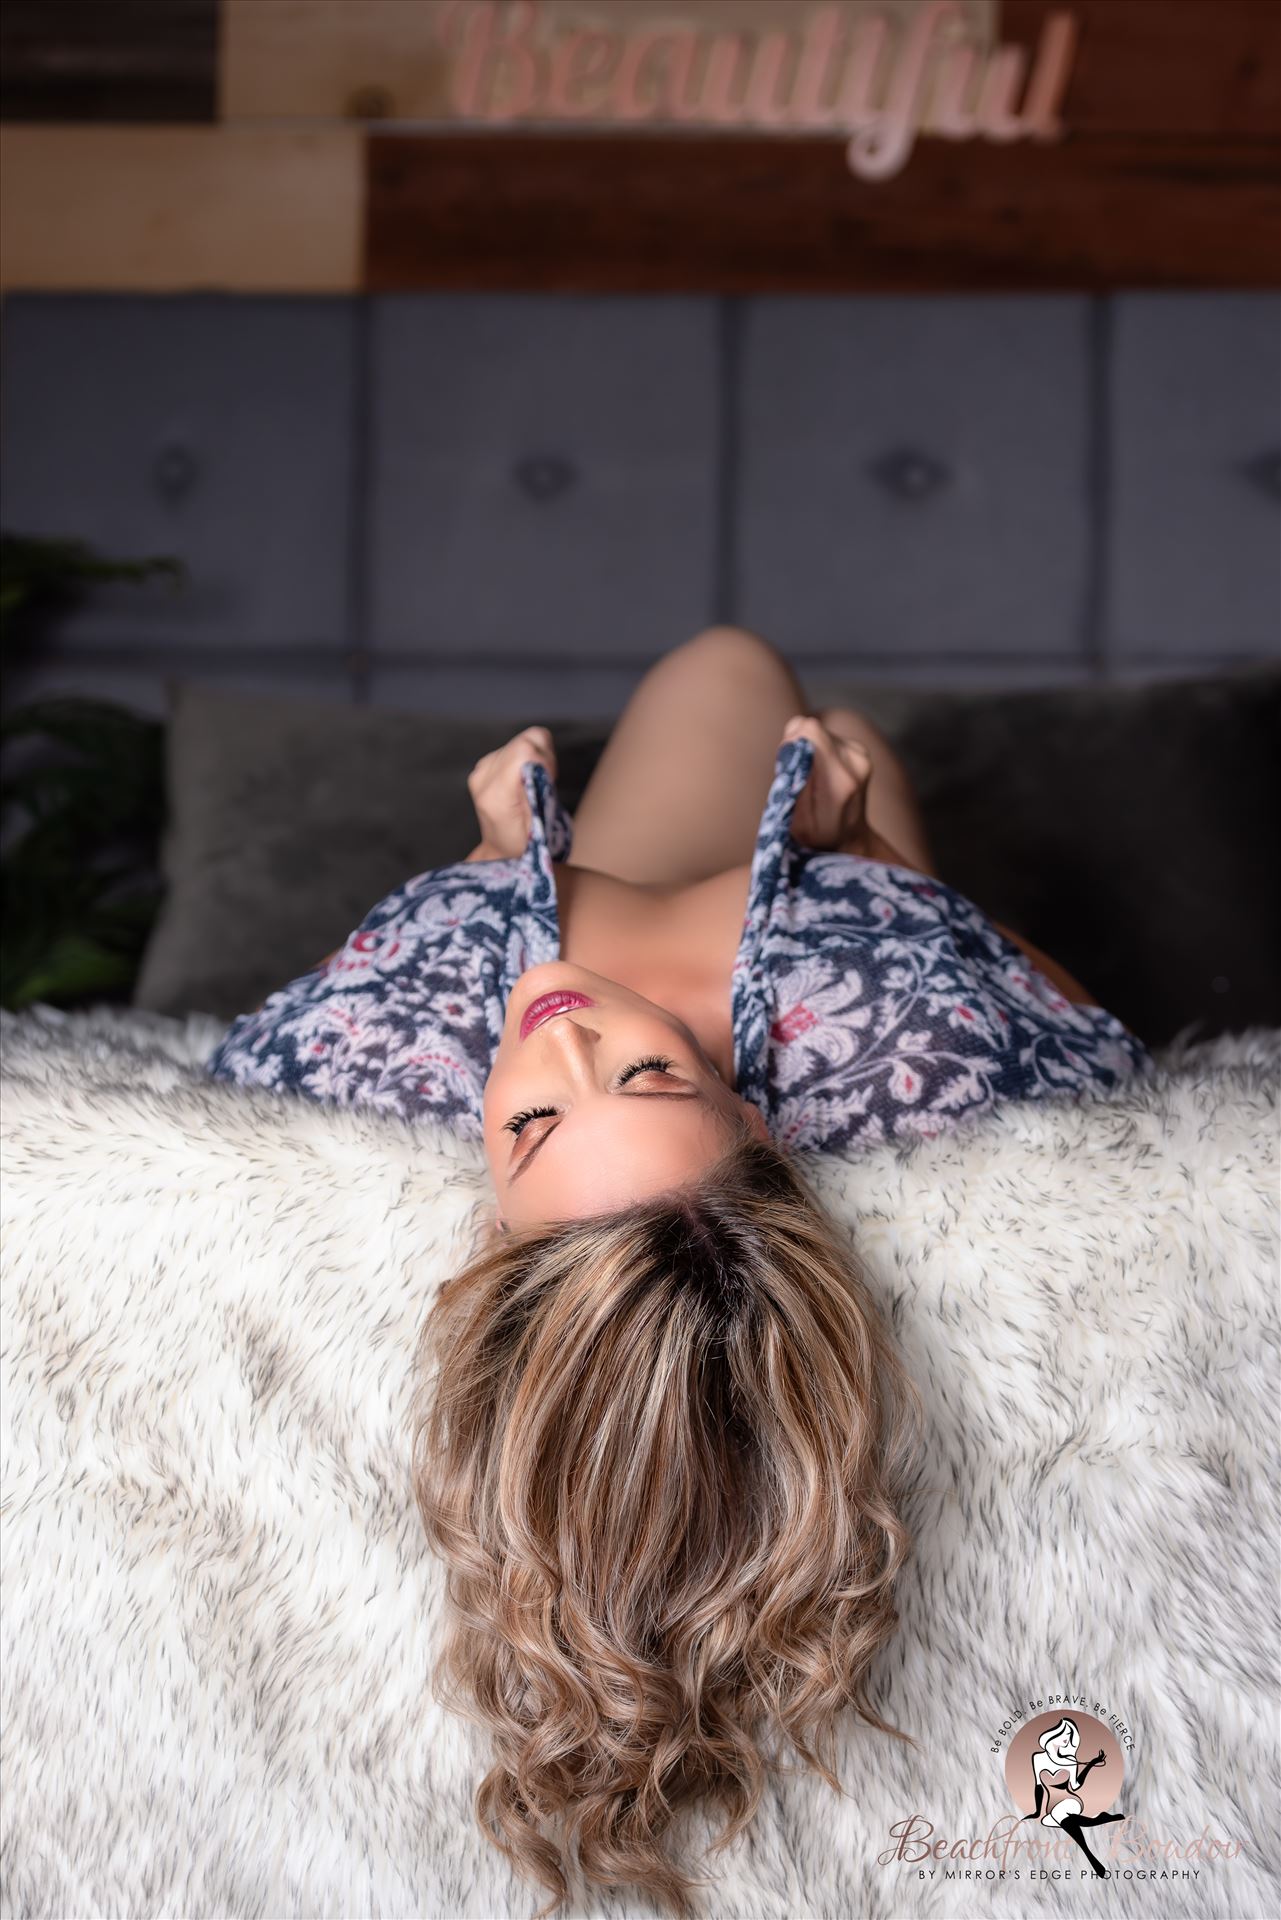 Port-2405.JPG Beachfront Boudoir by Mirror's Edge Photography is a Boutique Luxury Boudoir Photography Studio located just blocks from the beach in Oceano, California. My mission is to show as many women as possible how beautiful they truly are! by Sarah Williams